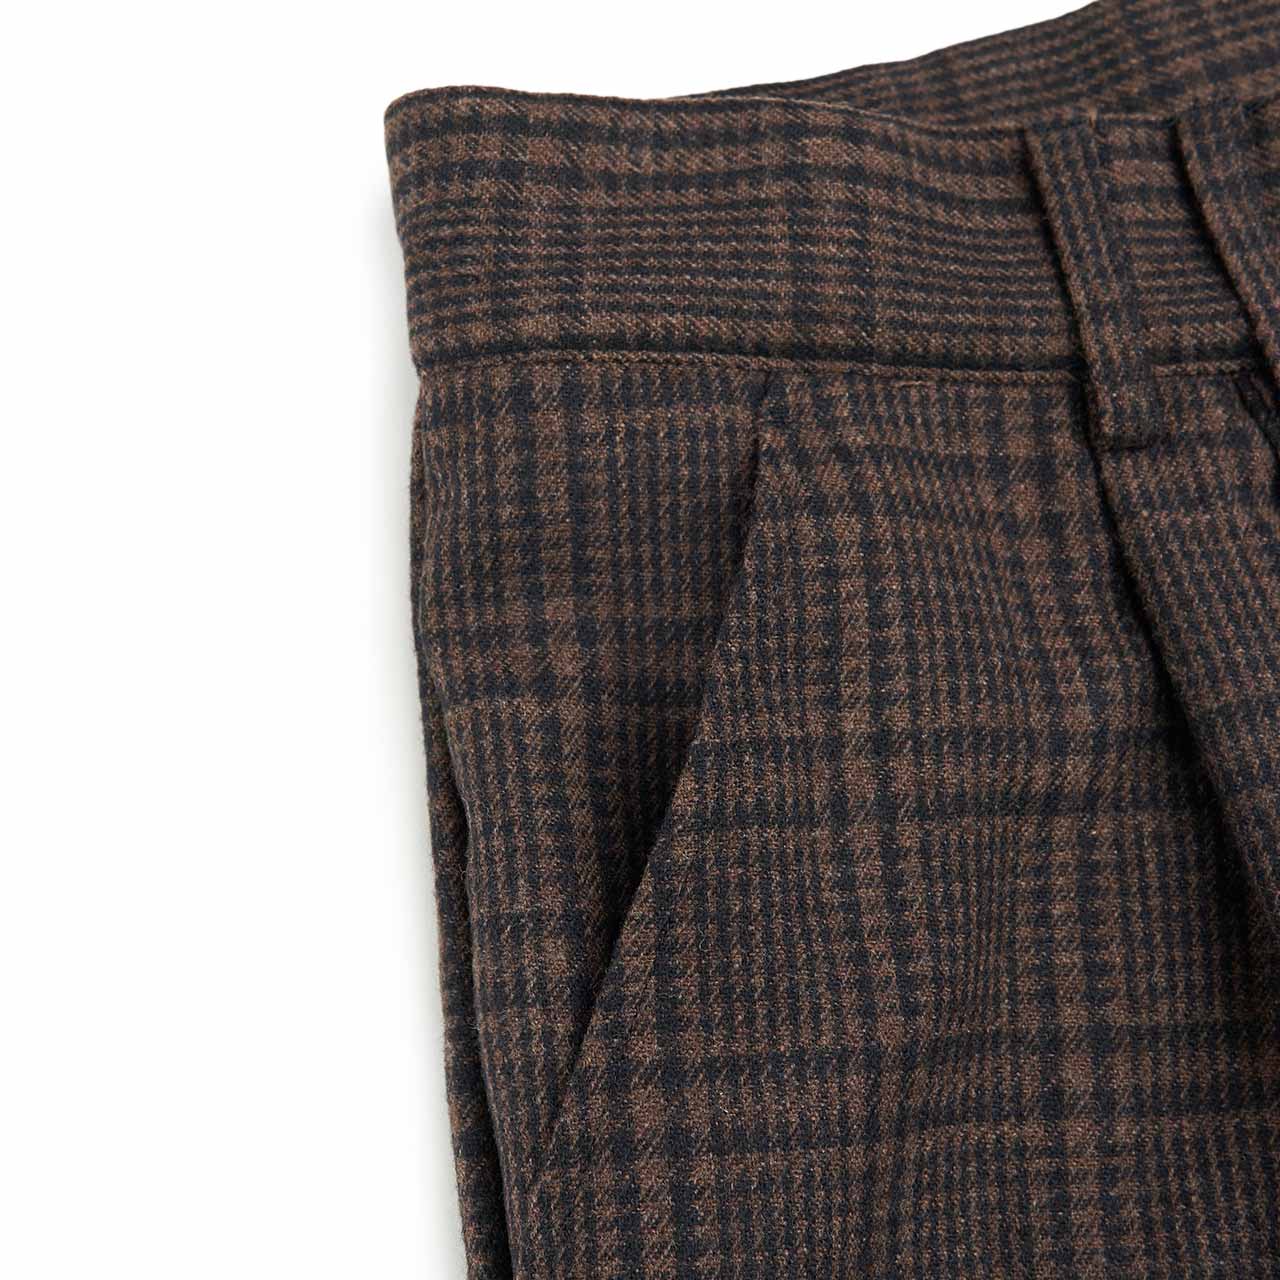 rassvet checked pleated trousers (brown)